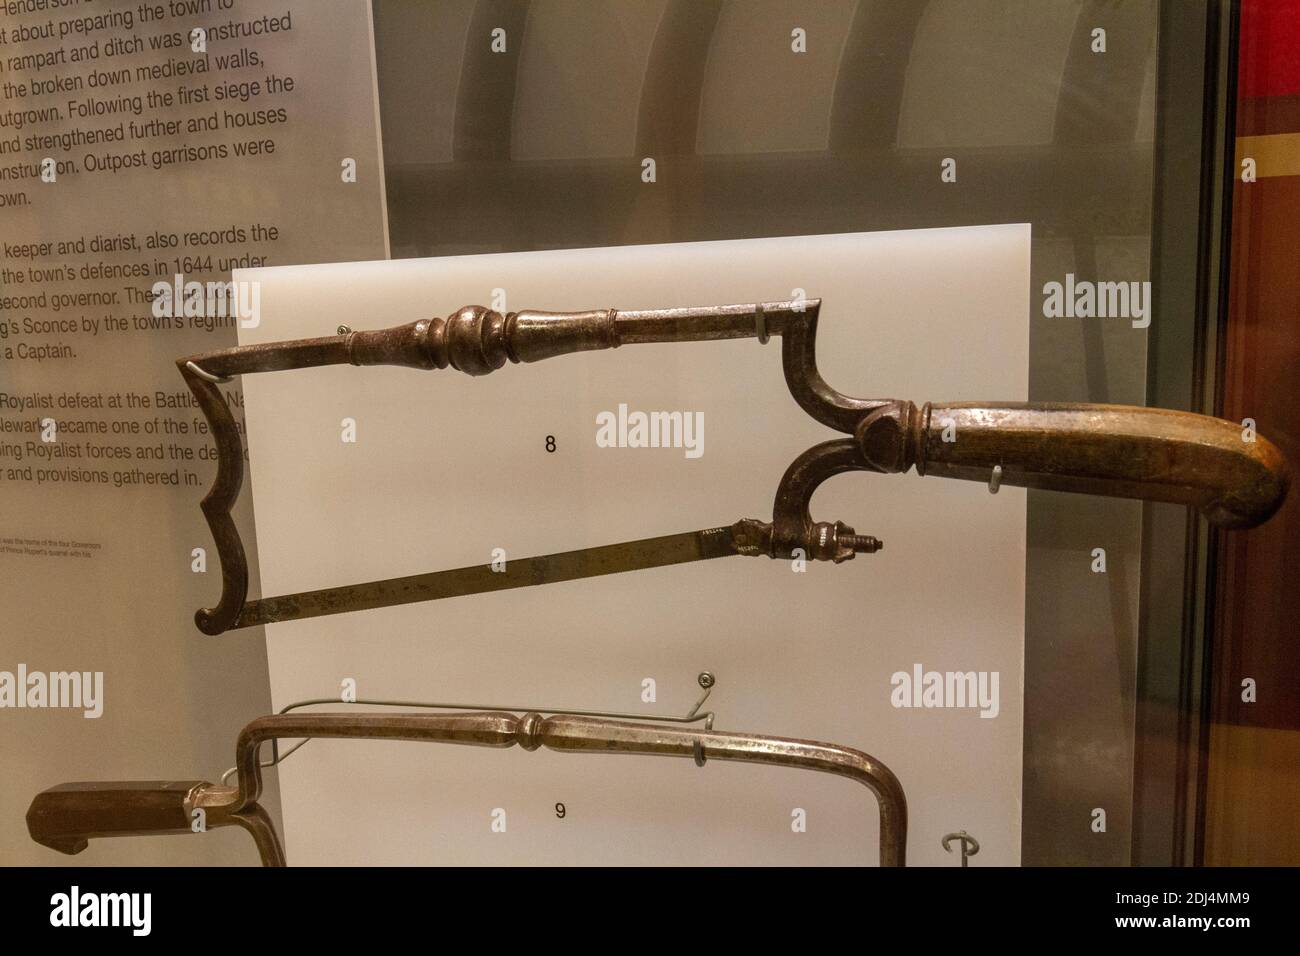 An ornate bow frame amputation saw on display in the National Civil War Centre, Newark Museum, Newark-on-Trent, Notts, UK. Stock Photo